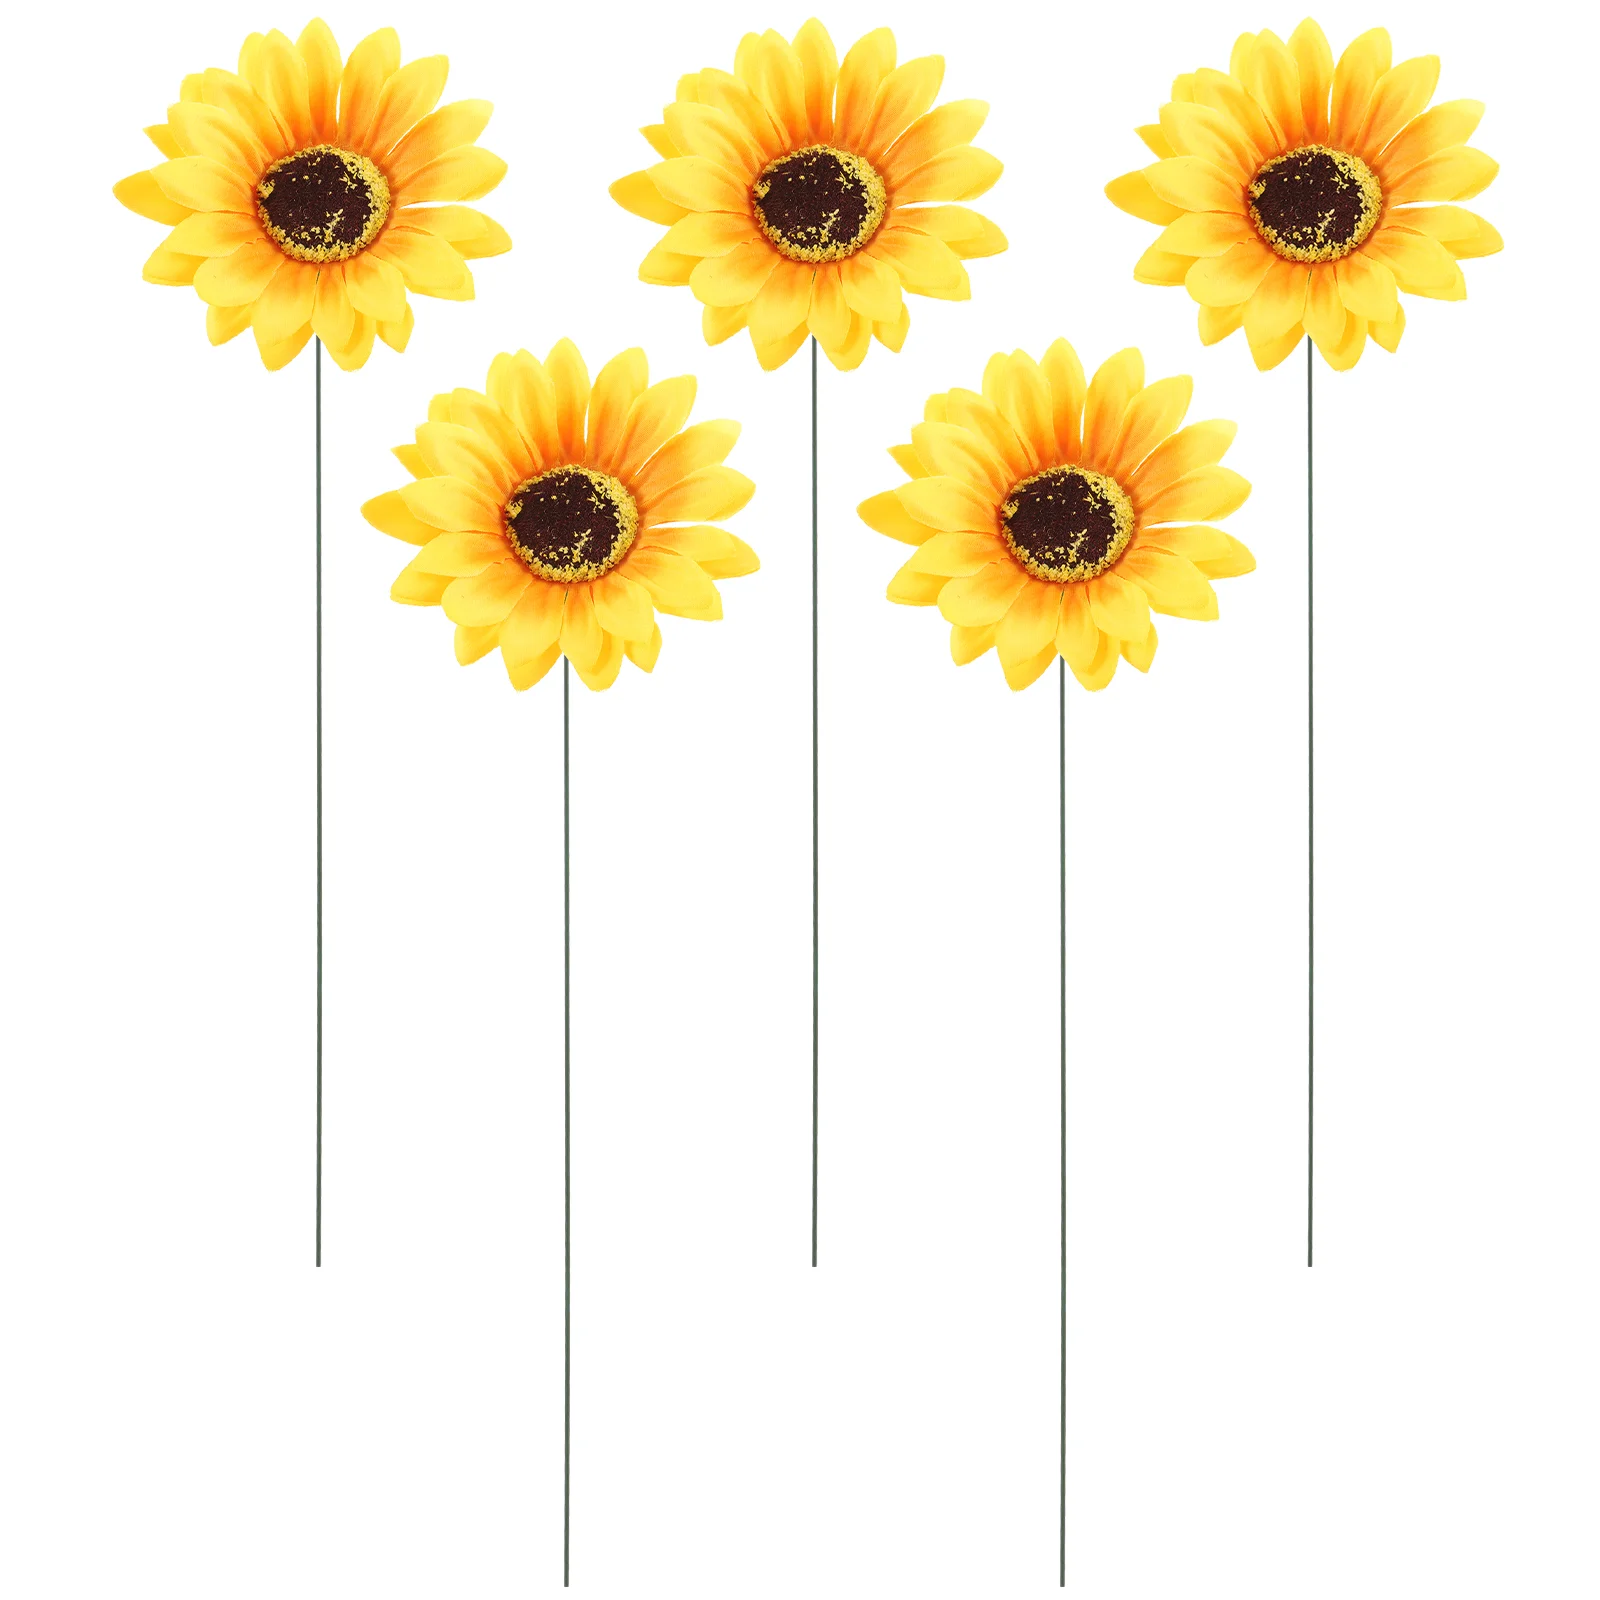 

5Pcs Garden Sunflower Stake Lawn Sunflower Stake Decor Stable Flower Stake for Yard Lawn Outdoor